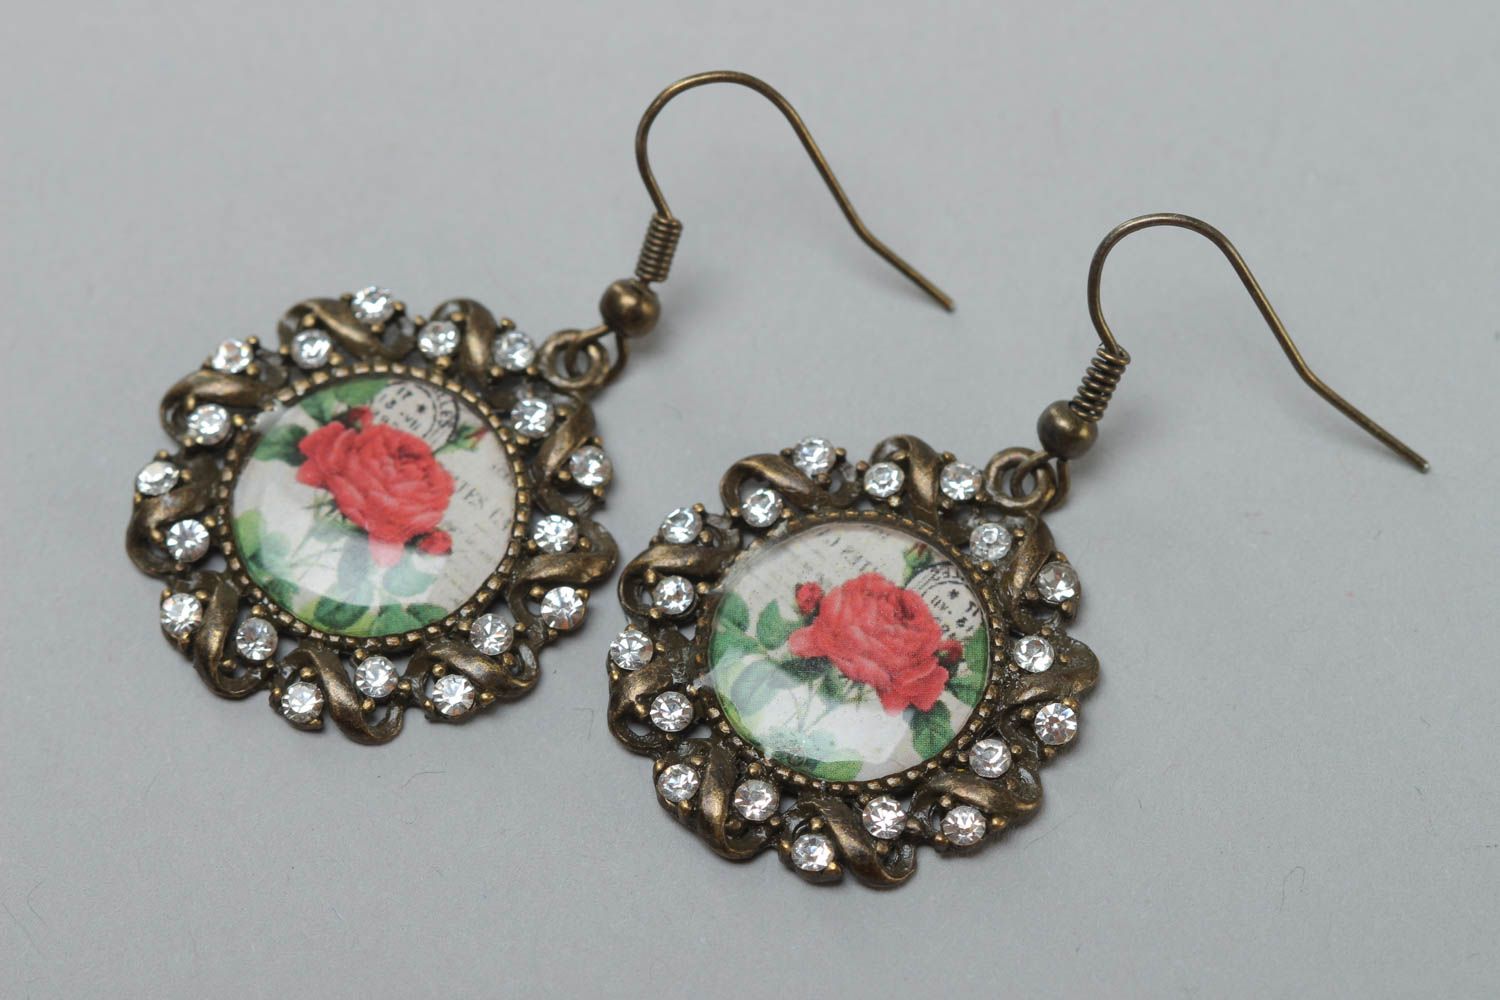 Handmade stylish earrings made of glassy glaze and metal with beads in vintage style photo 2